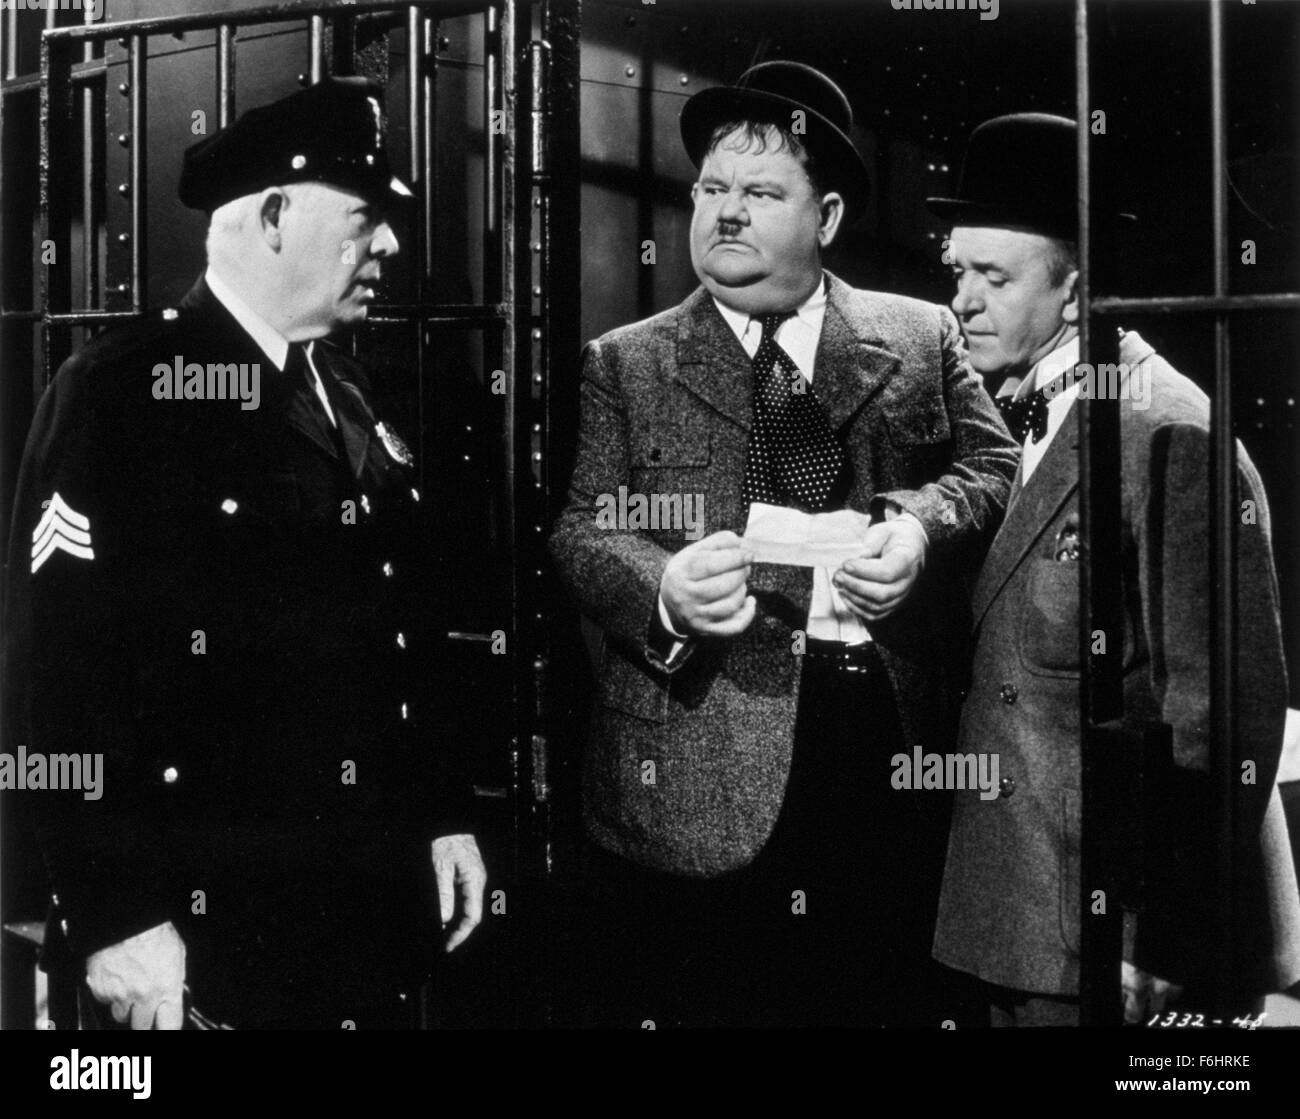 1944, Film Title: NOTHING BUT TROUBLE, Director: SAM TAYLOR, Studio: MGM, Pictured: 1944, BEHIND BARS (IN JAIL), OLIVER HARDY, LAUREL & HARDY, STAN LAUREL, SAM TAYLOR, GAOL, PRISON, FAT, SWEATY, HITLER MOUSTACHE, WARDEN, COMEDY, HAT. (Credit Image: SNAP) Stock Photo